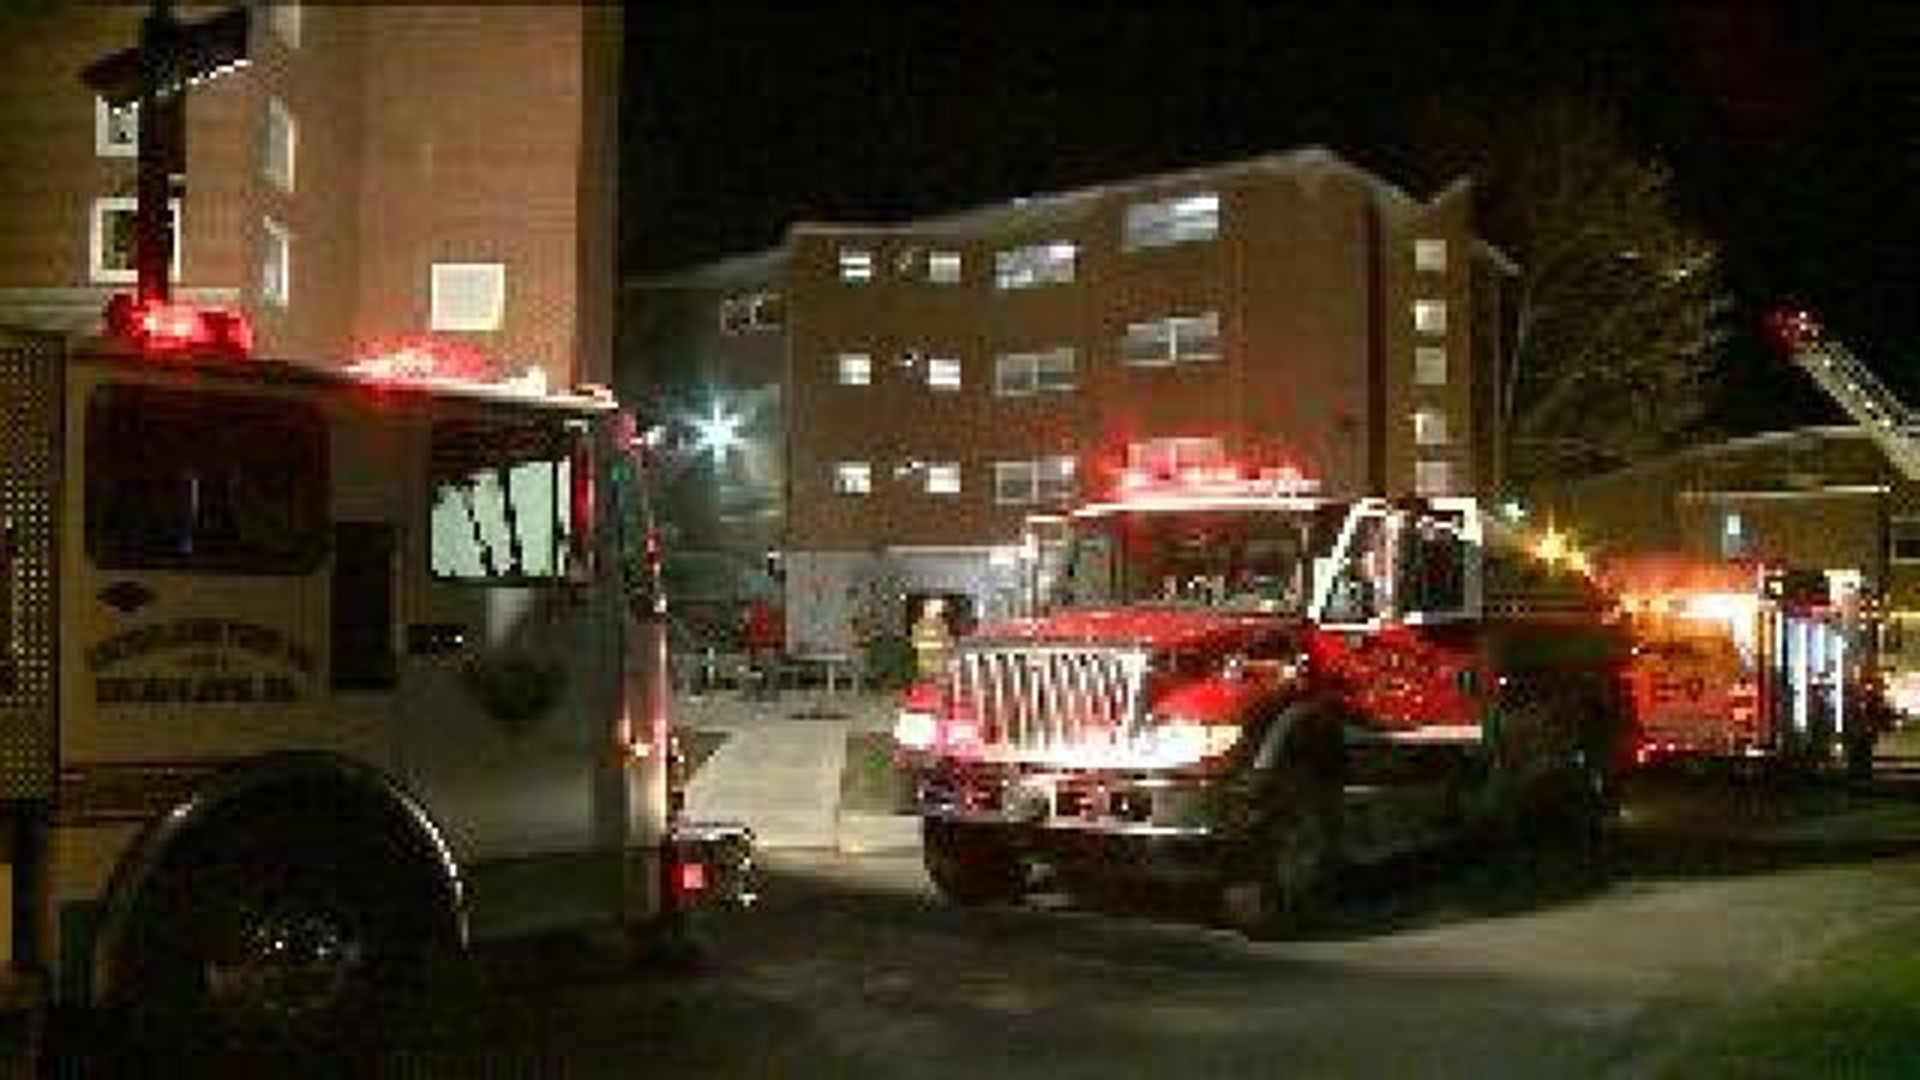 Fire Starts in Dumpster at Keystone College